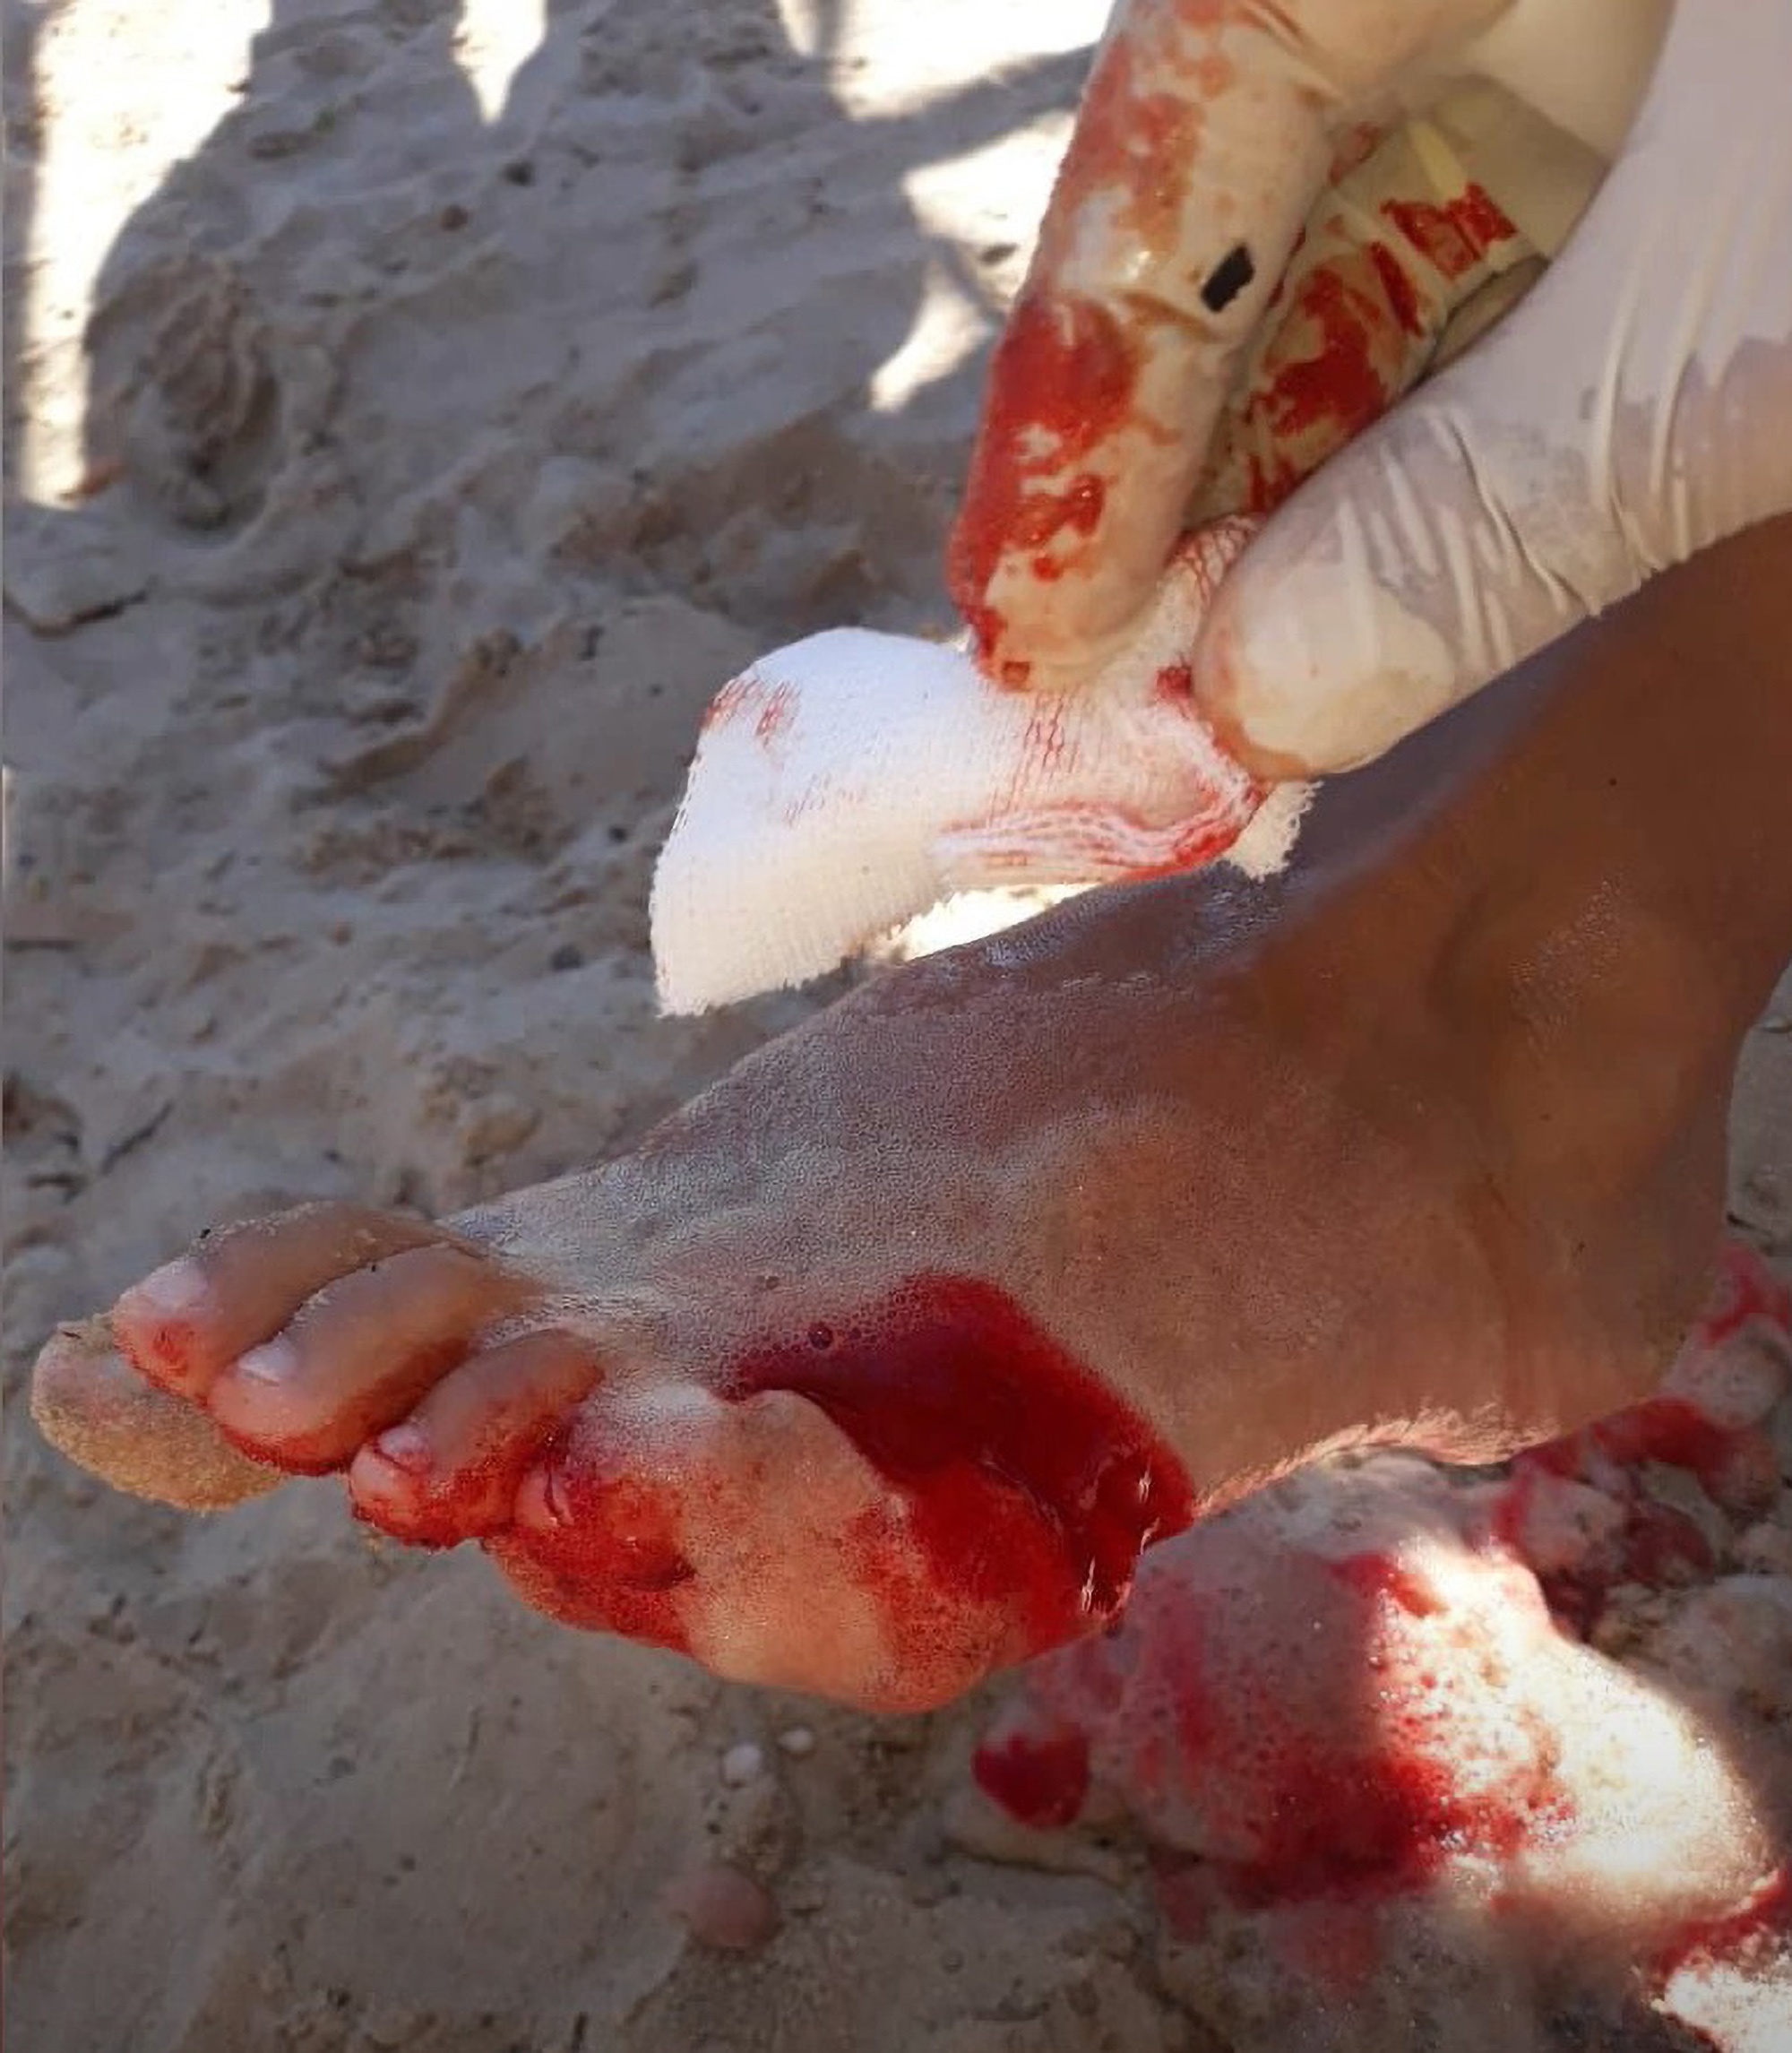 Read more about the article Teenage Girl Loses A Toe In Attack By Piranhas That Left 20 Injured